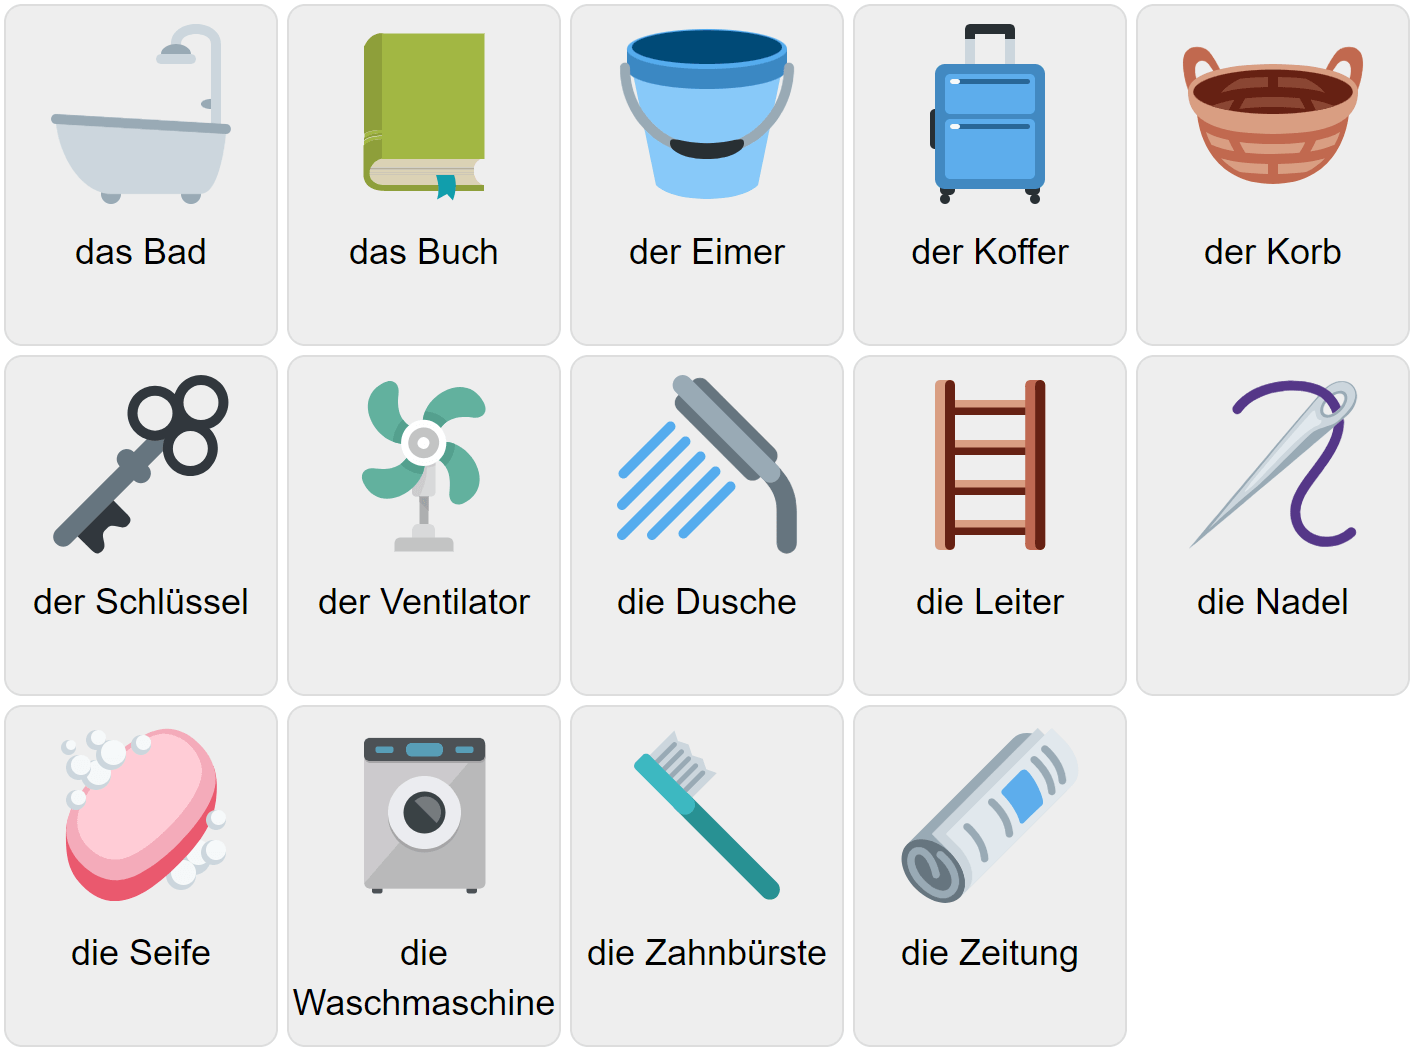 Things Around the House in German